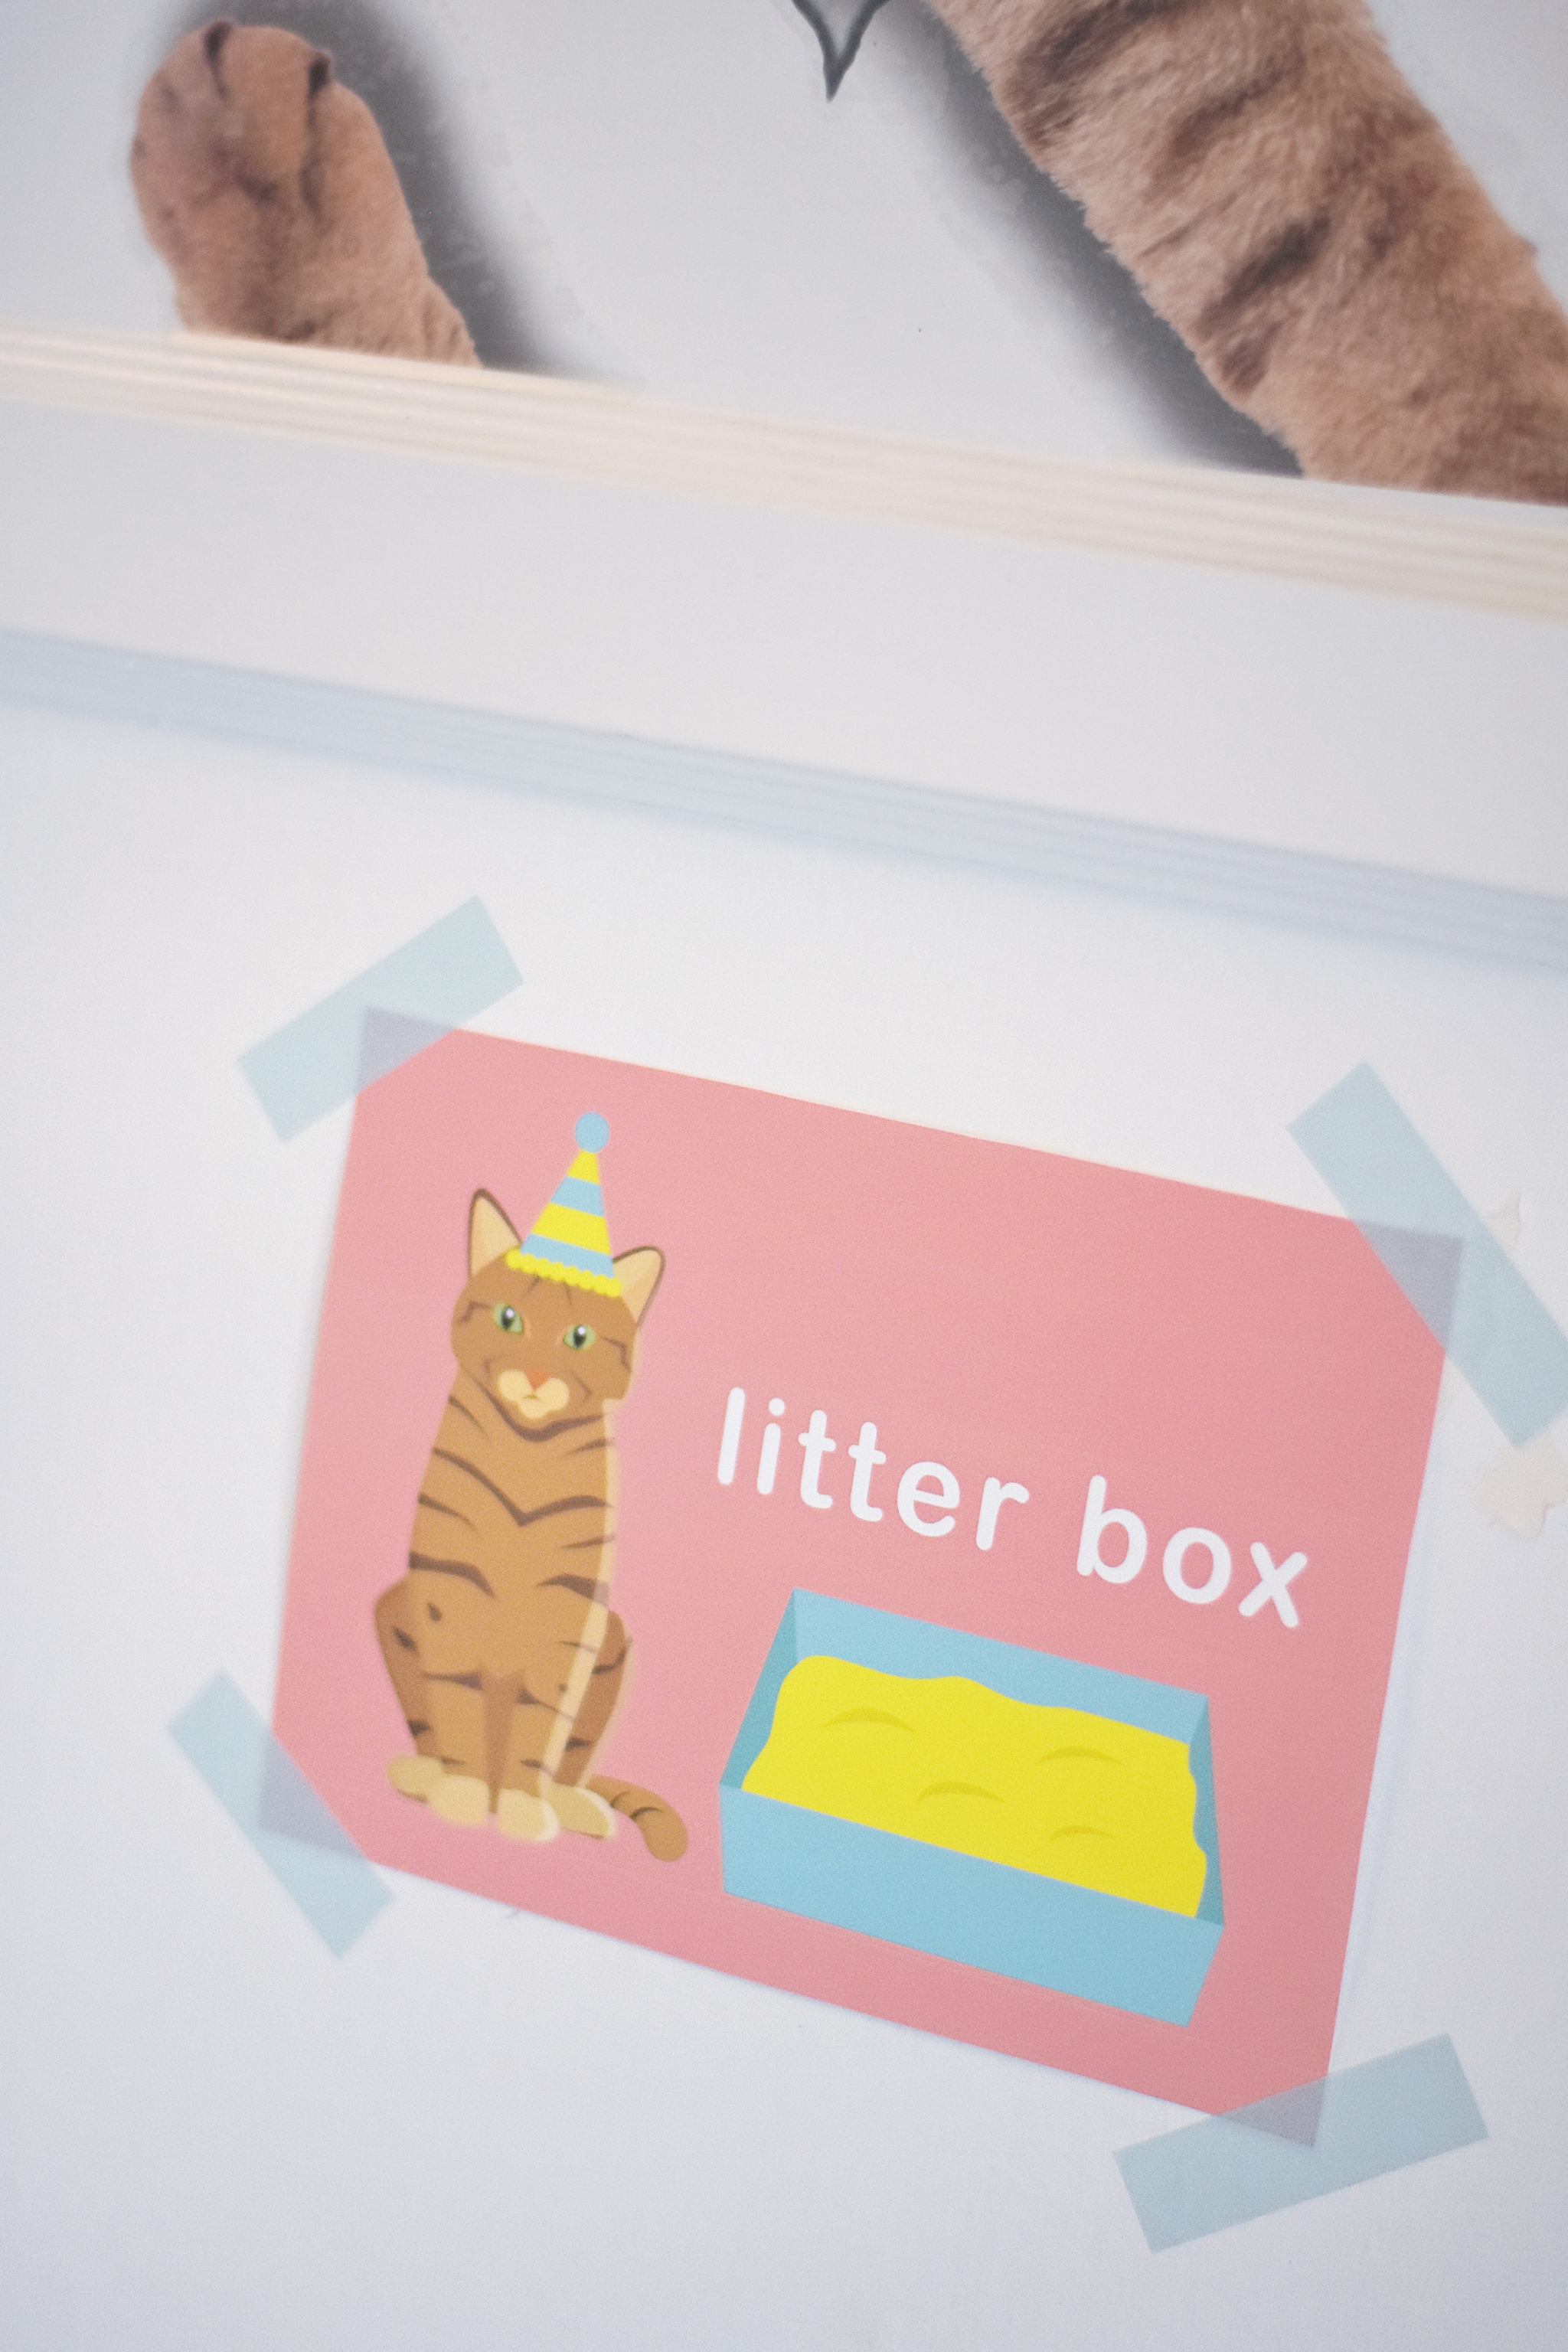 Direct guests to your "litter box!"